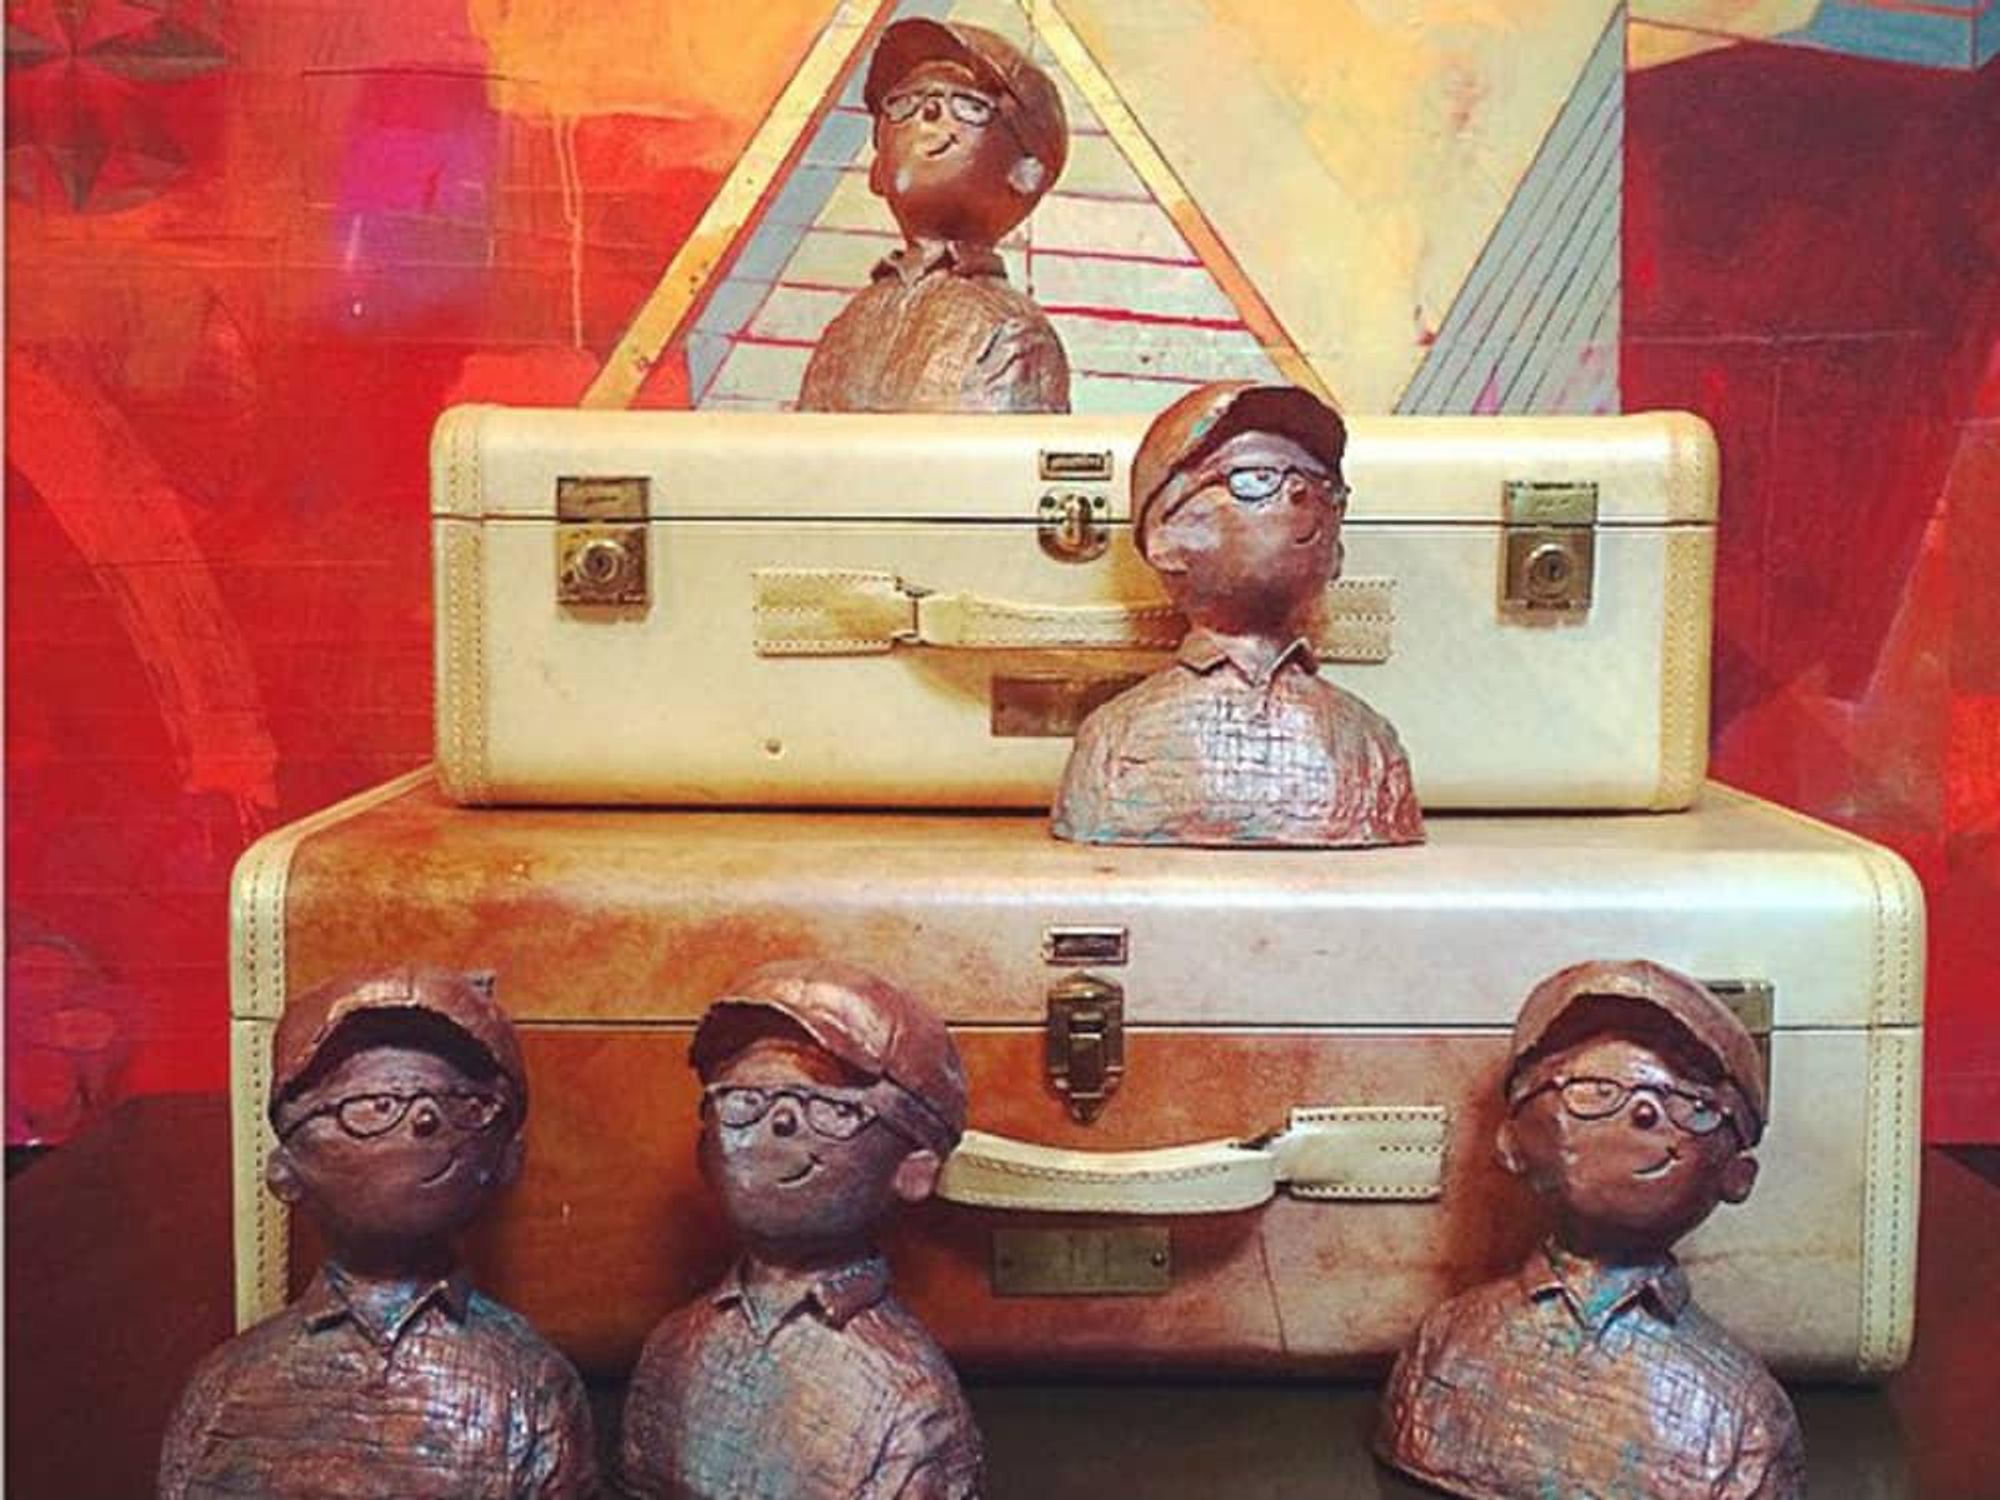 Busts and vintage suitcases at Life of Riley in Deep Ellum